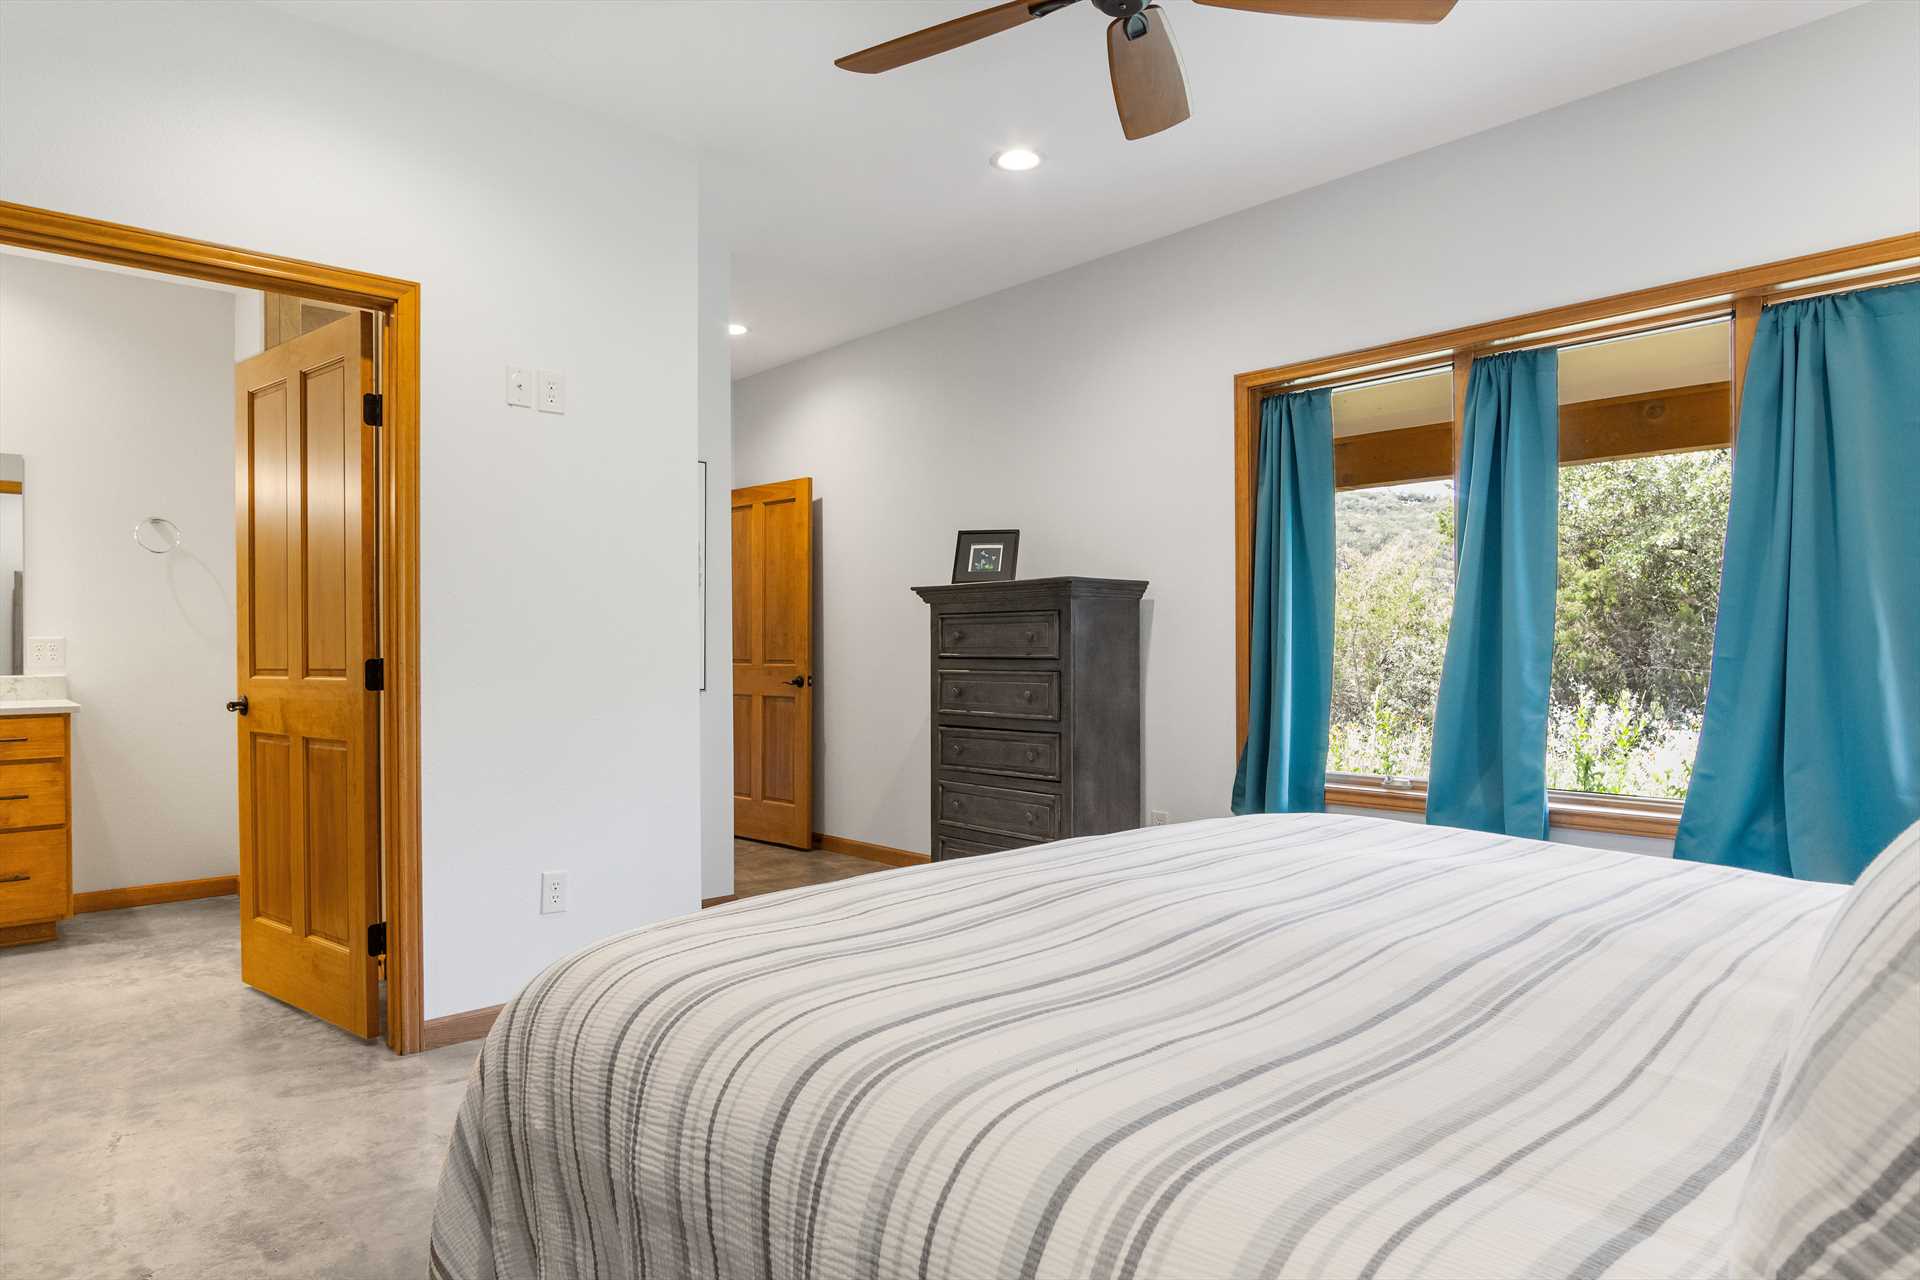                                                 Comfort and relaxation is key at the Roadrunner Canyon Ranch! That means plenty of natural light, central air and heat, and ceiling fans you can adjust to your liking.